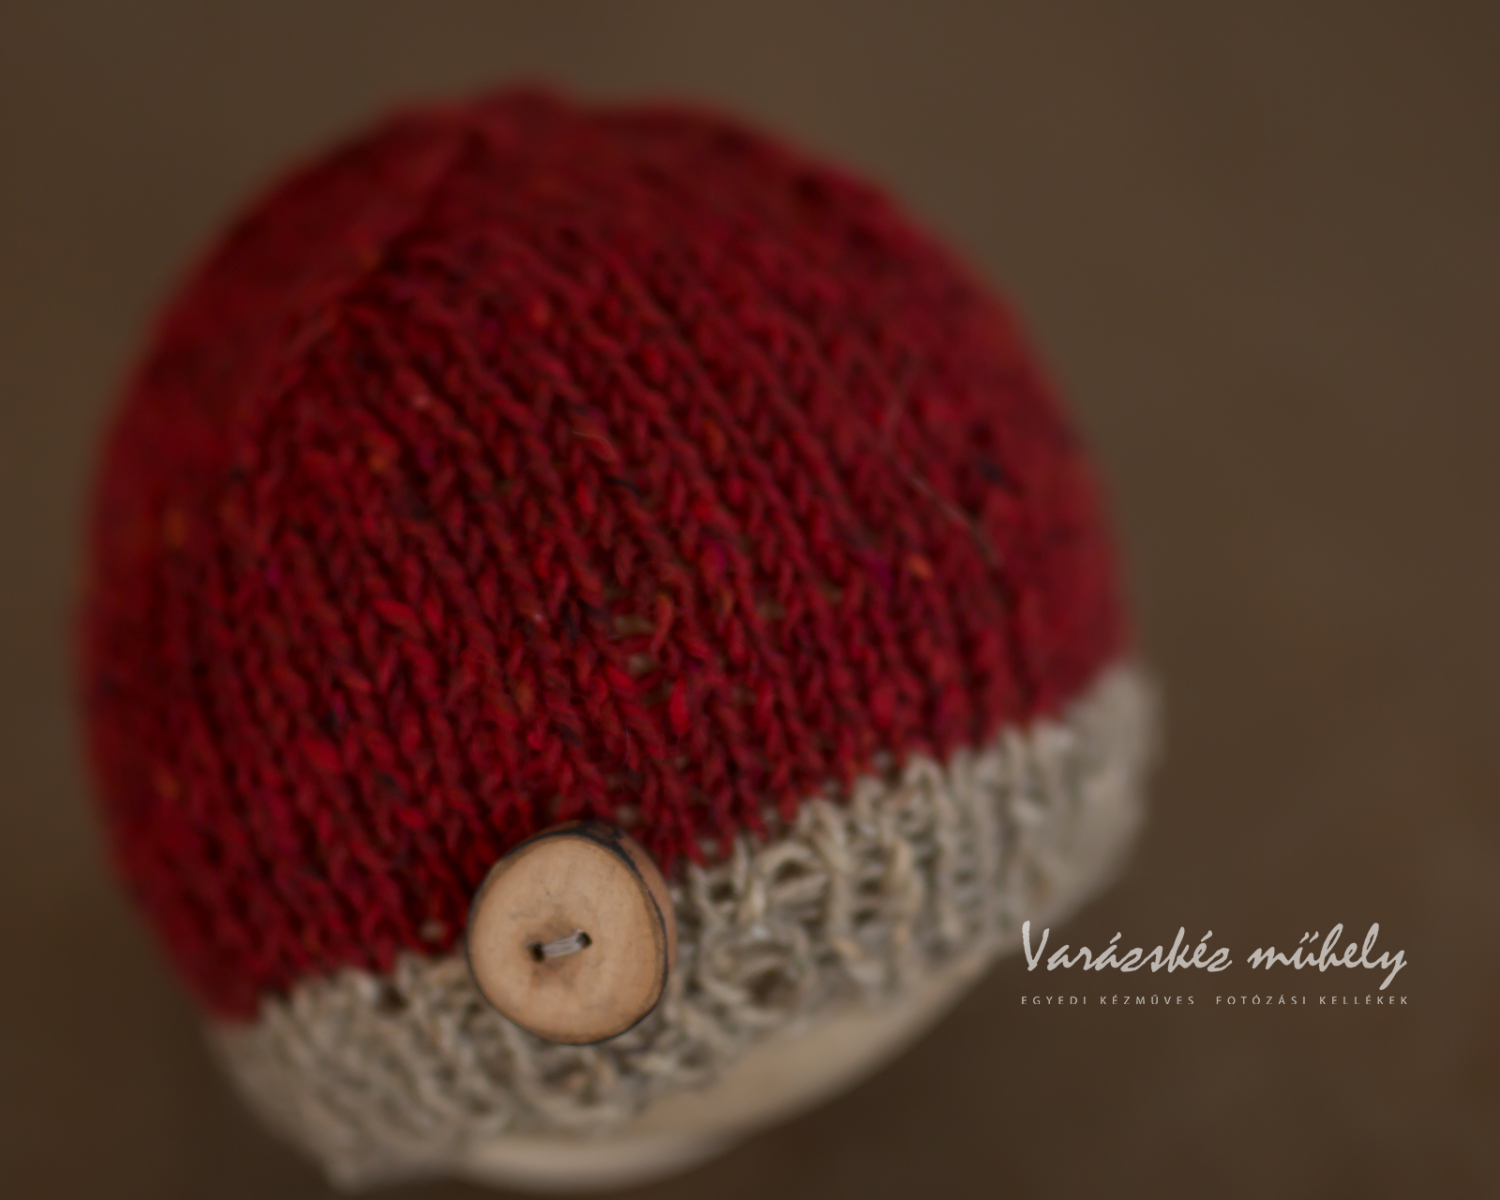 Rustic Claret Beige Hat with Wooden Button